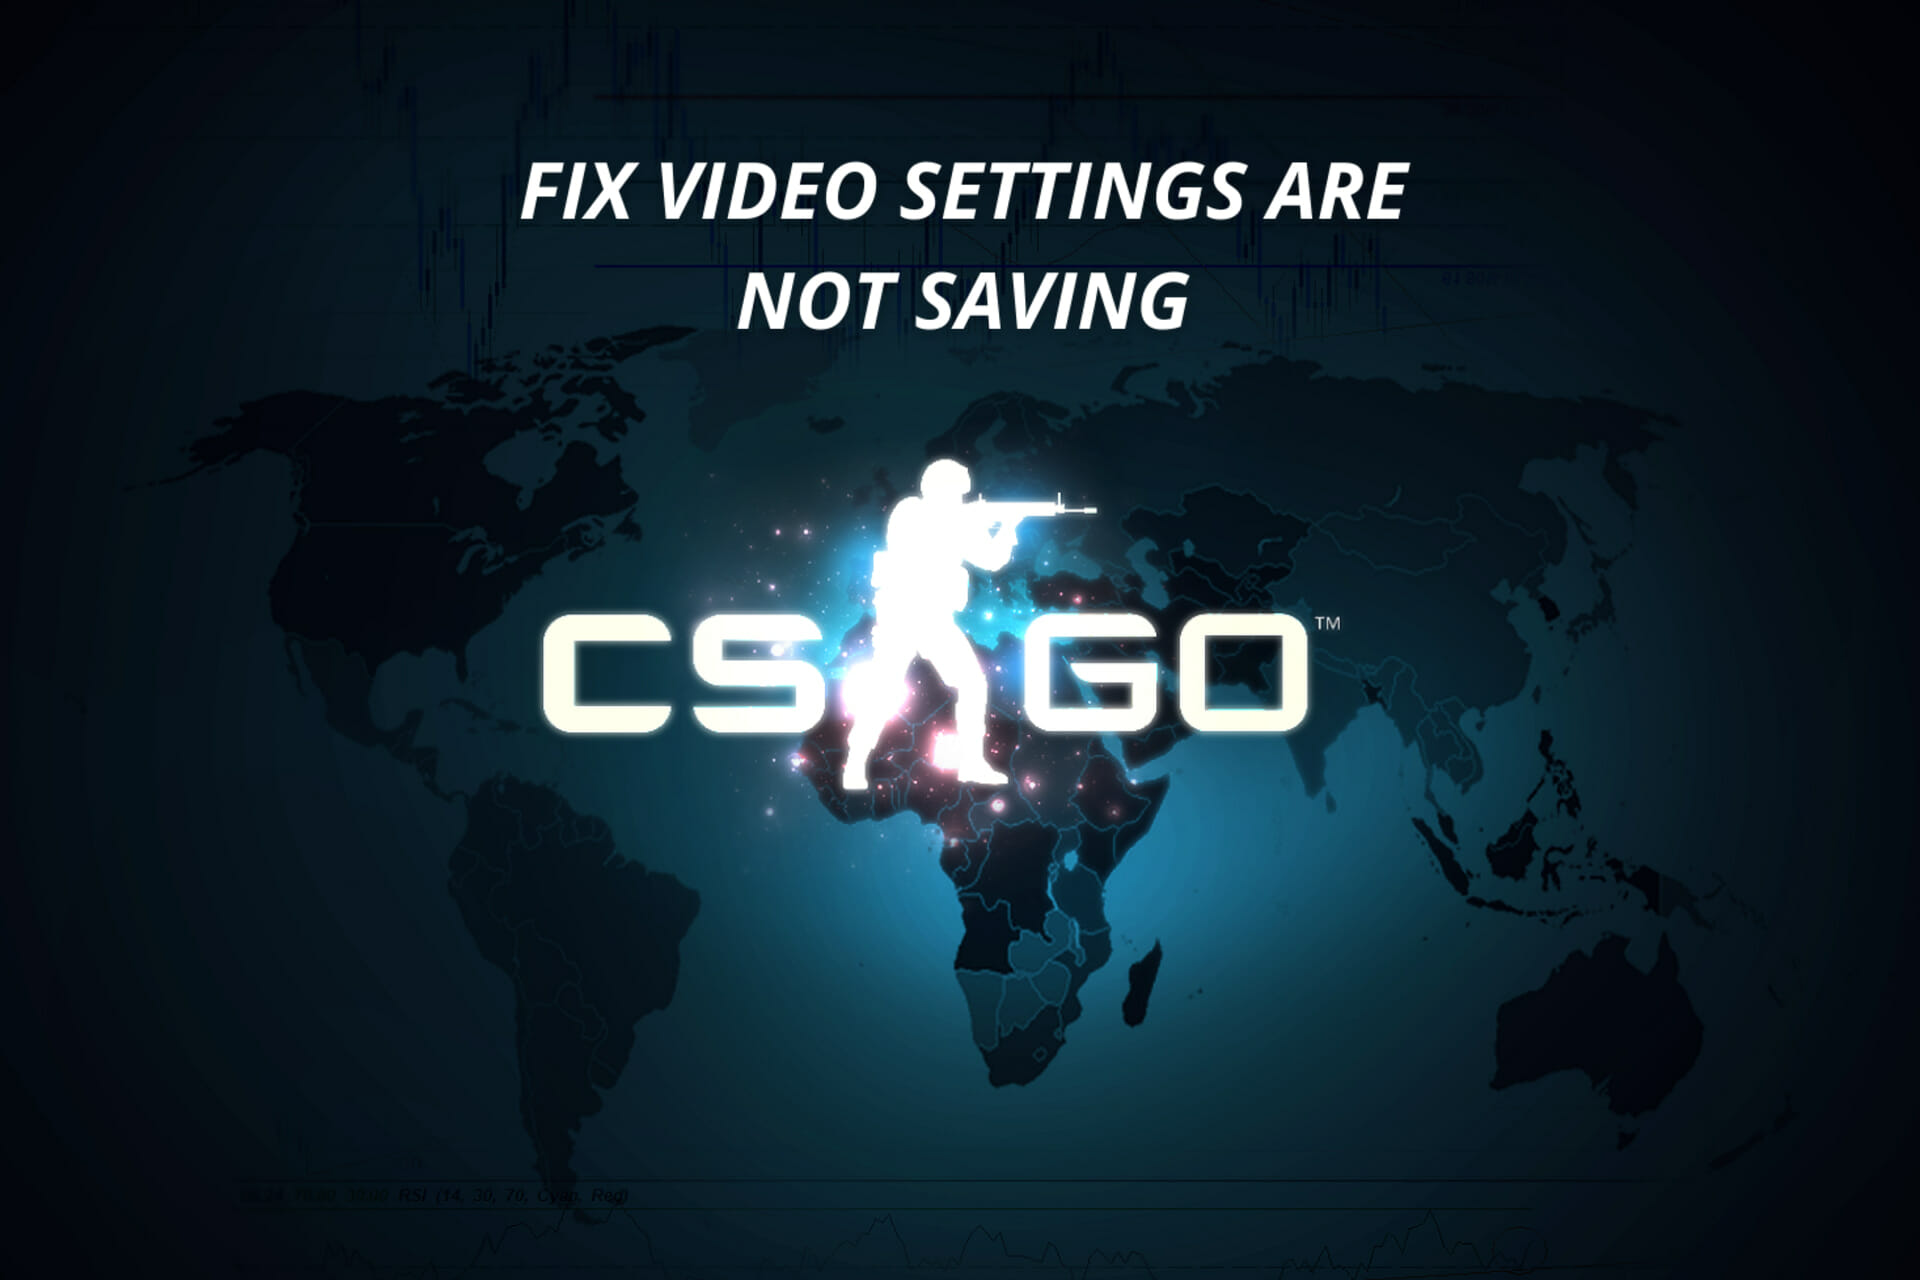 For a day trip have mistaken commit FIX: CS GO video settings are not saving